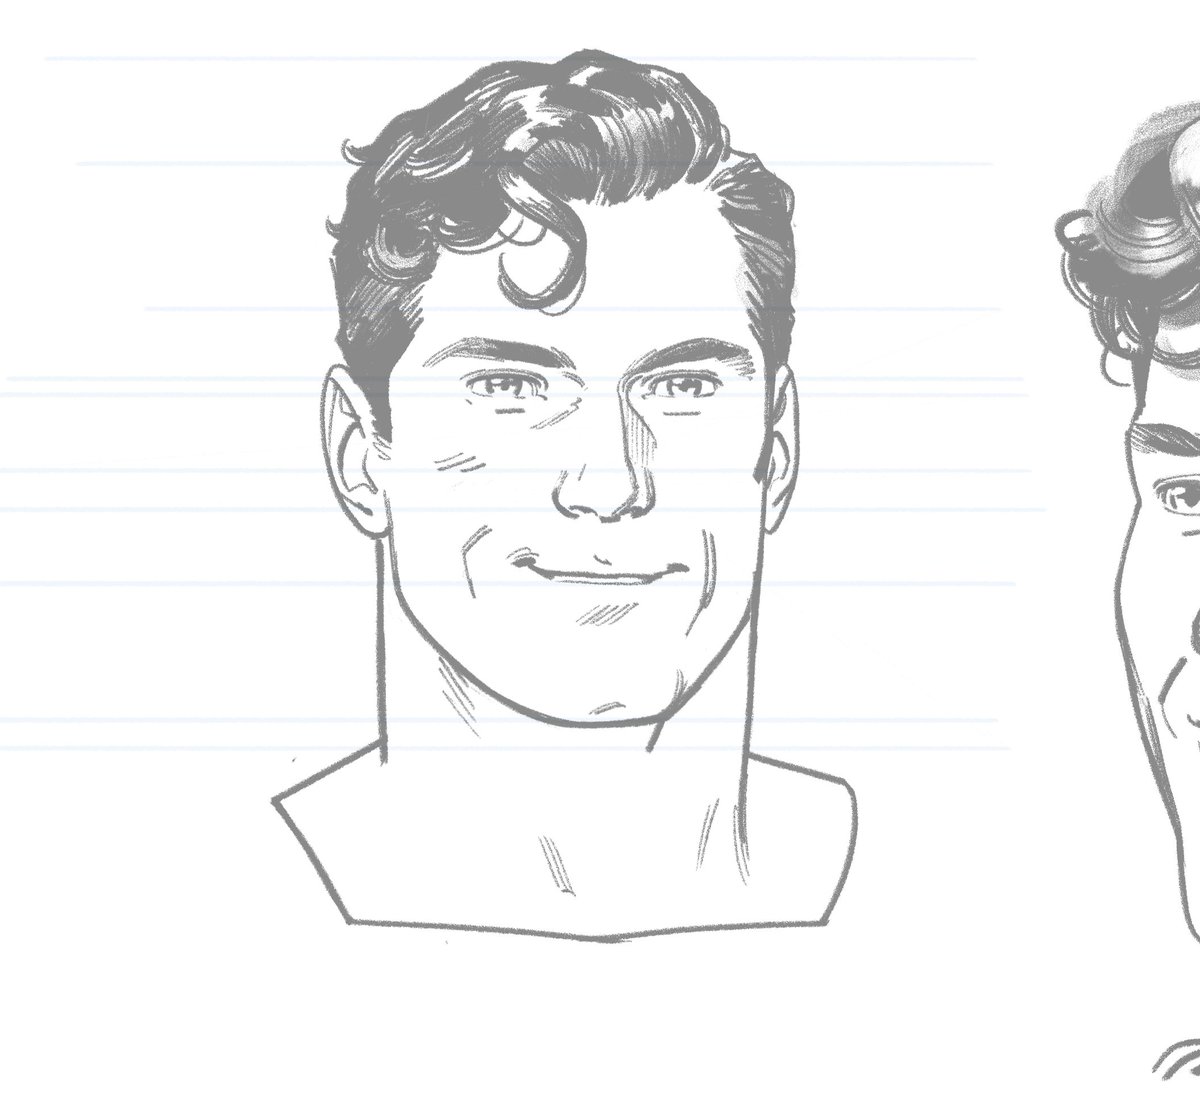 Did a study with the Cavill hair and the hair is the only thing I didn't futz with a little bit. He figured it out! https://t.co/J3Lfwl8XOc 